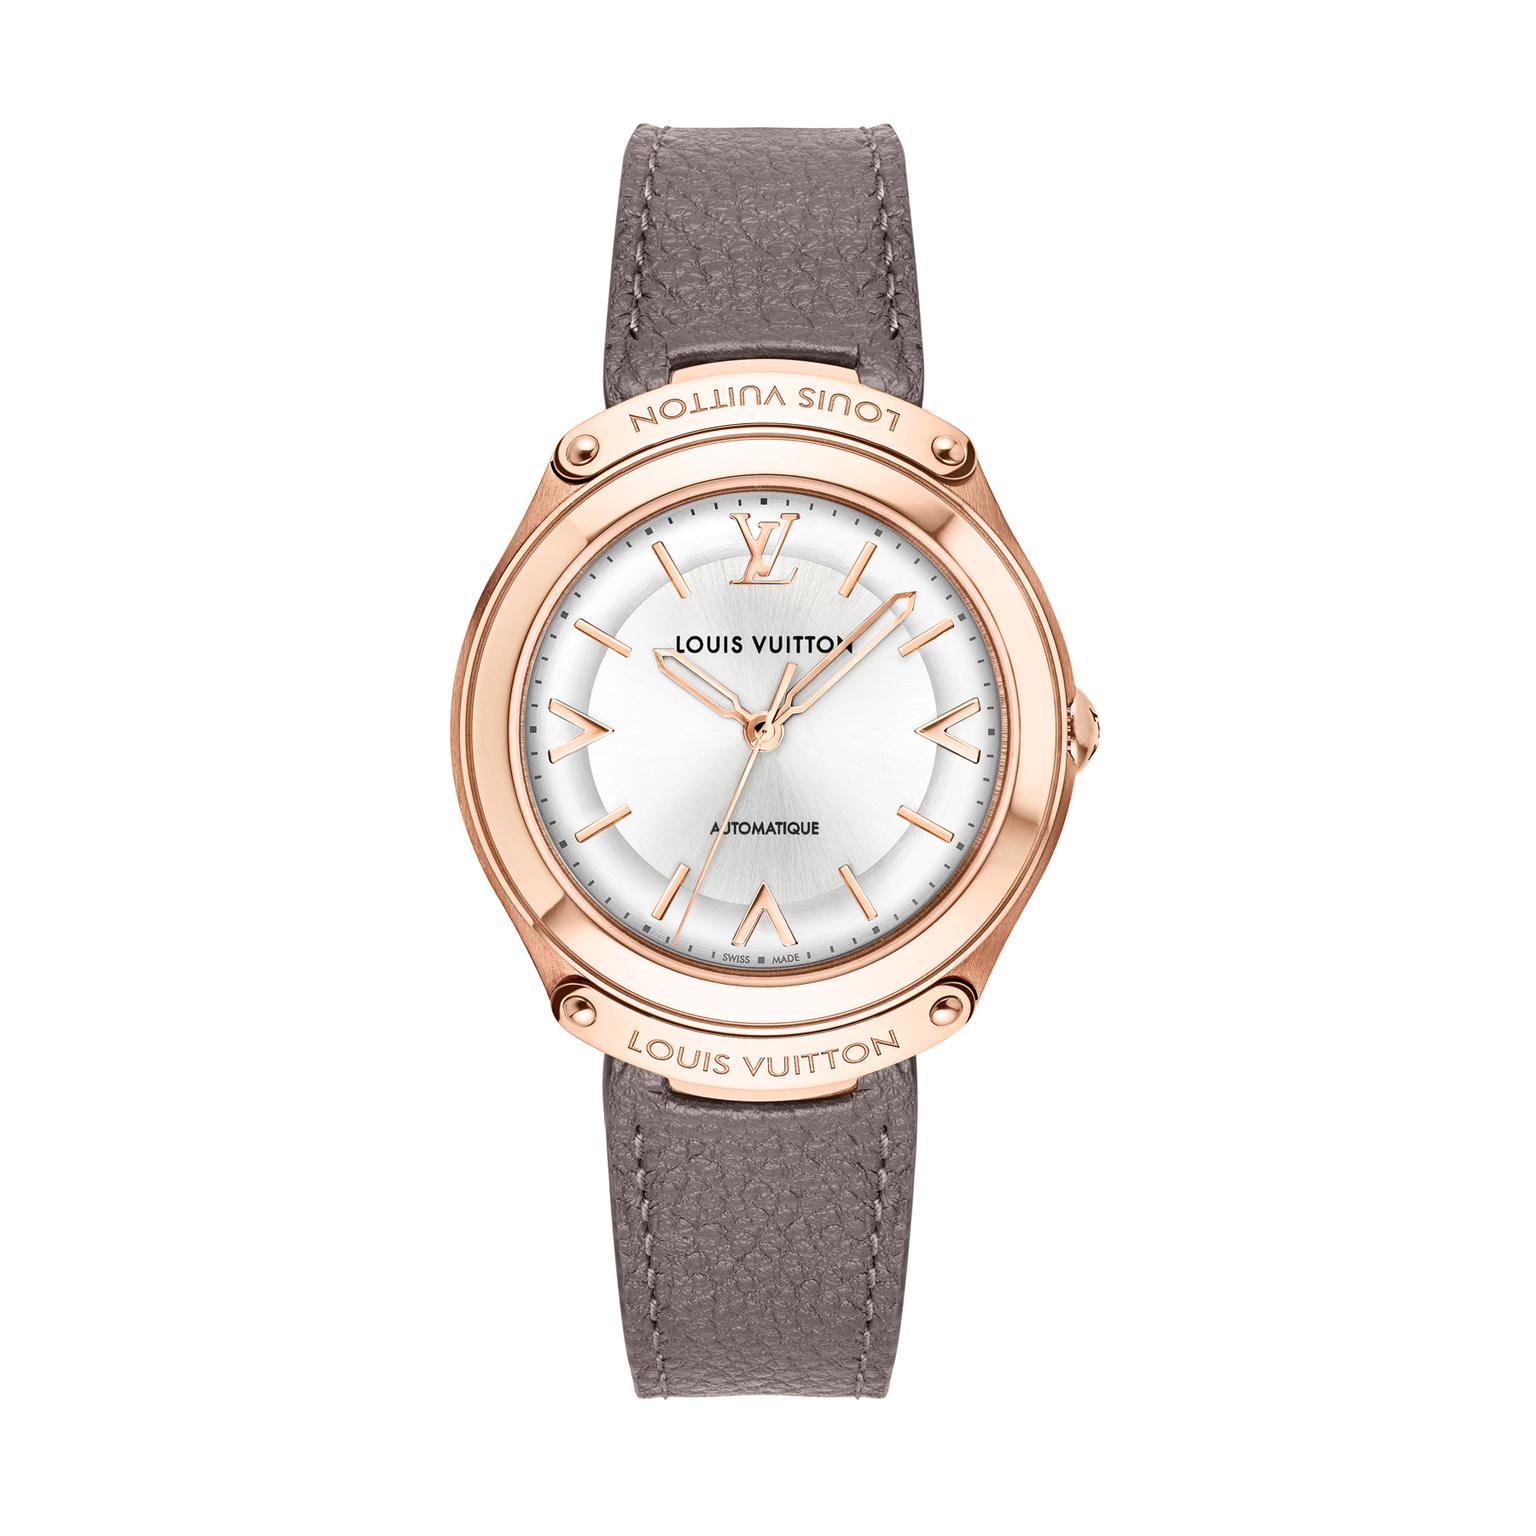 LV Fifty Five pink gold watch with diamonds, Louis Vuitton